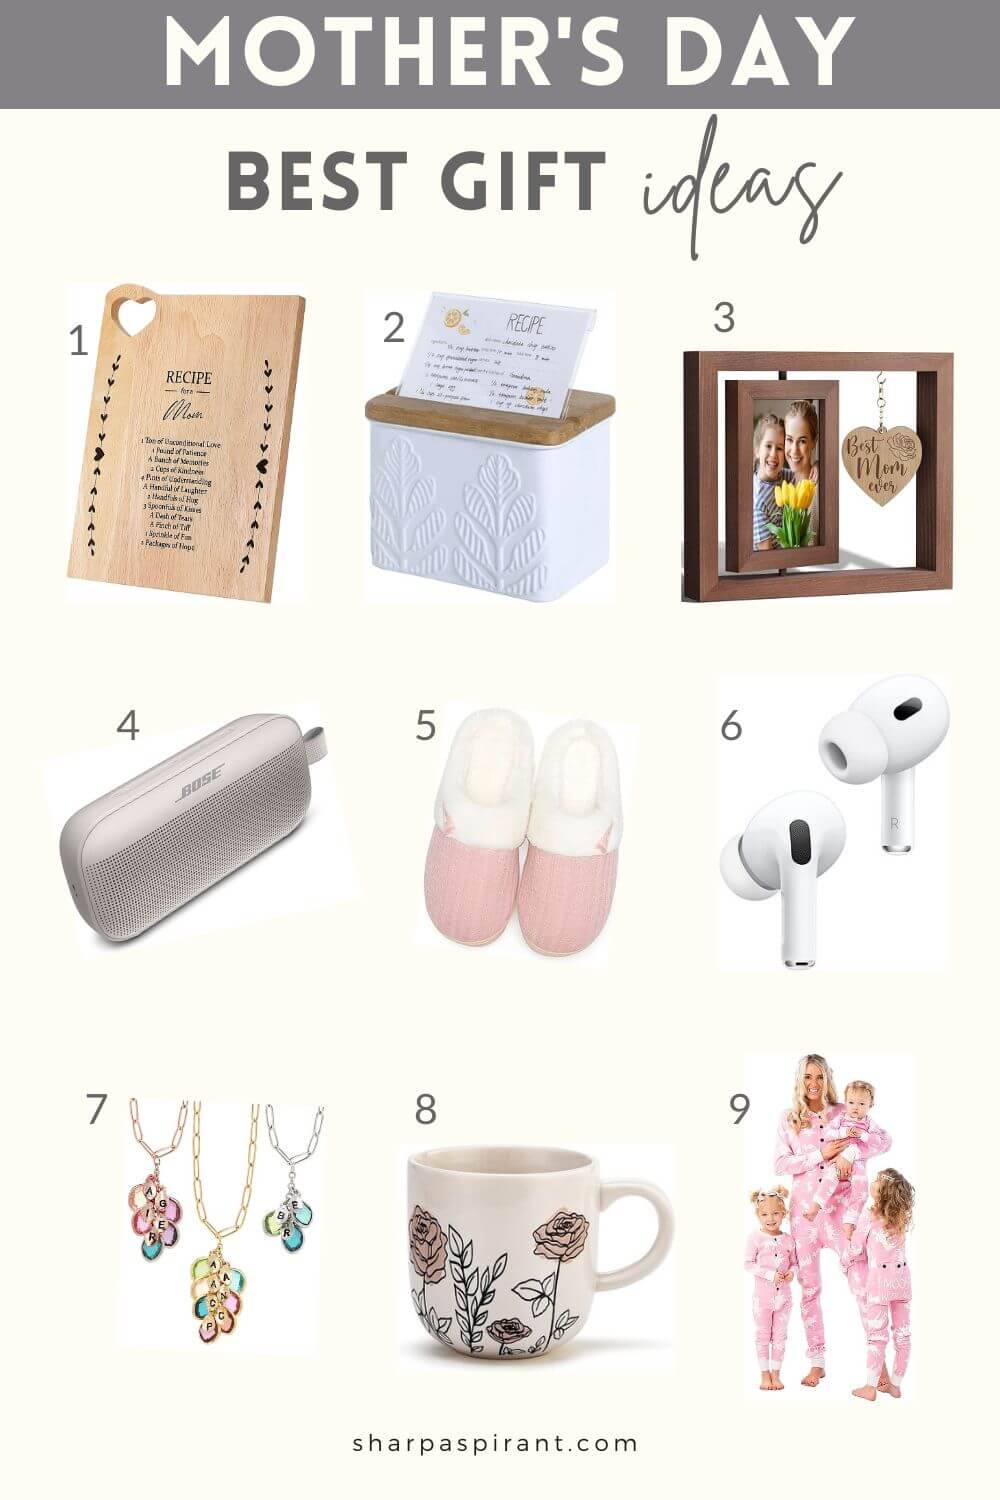 Are you looking for the best Mother's Day gift ideas? Check out our list of 30 thoughtful and unique ideas to make her day special.